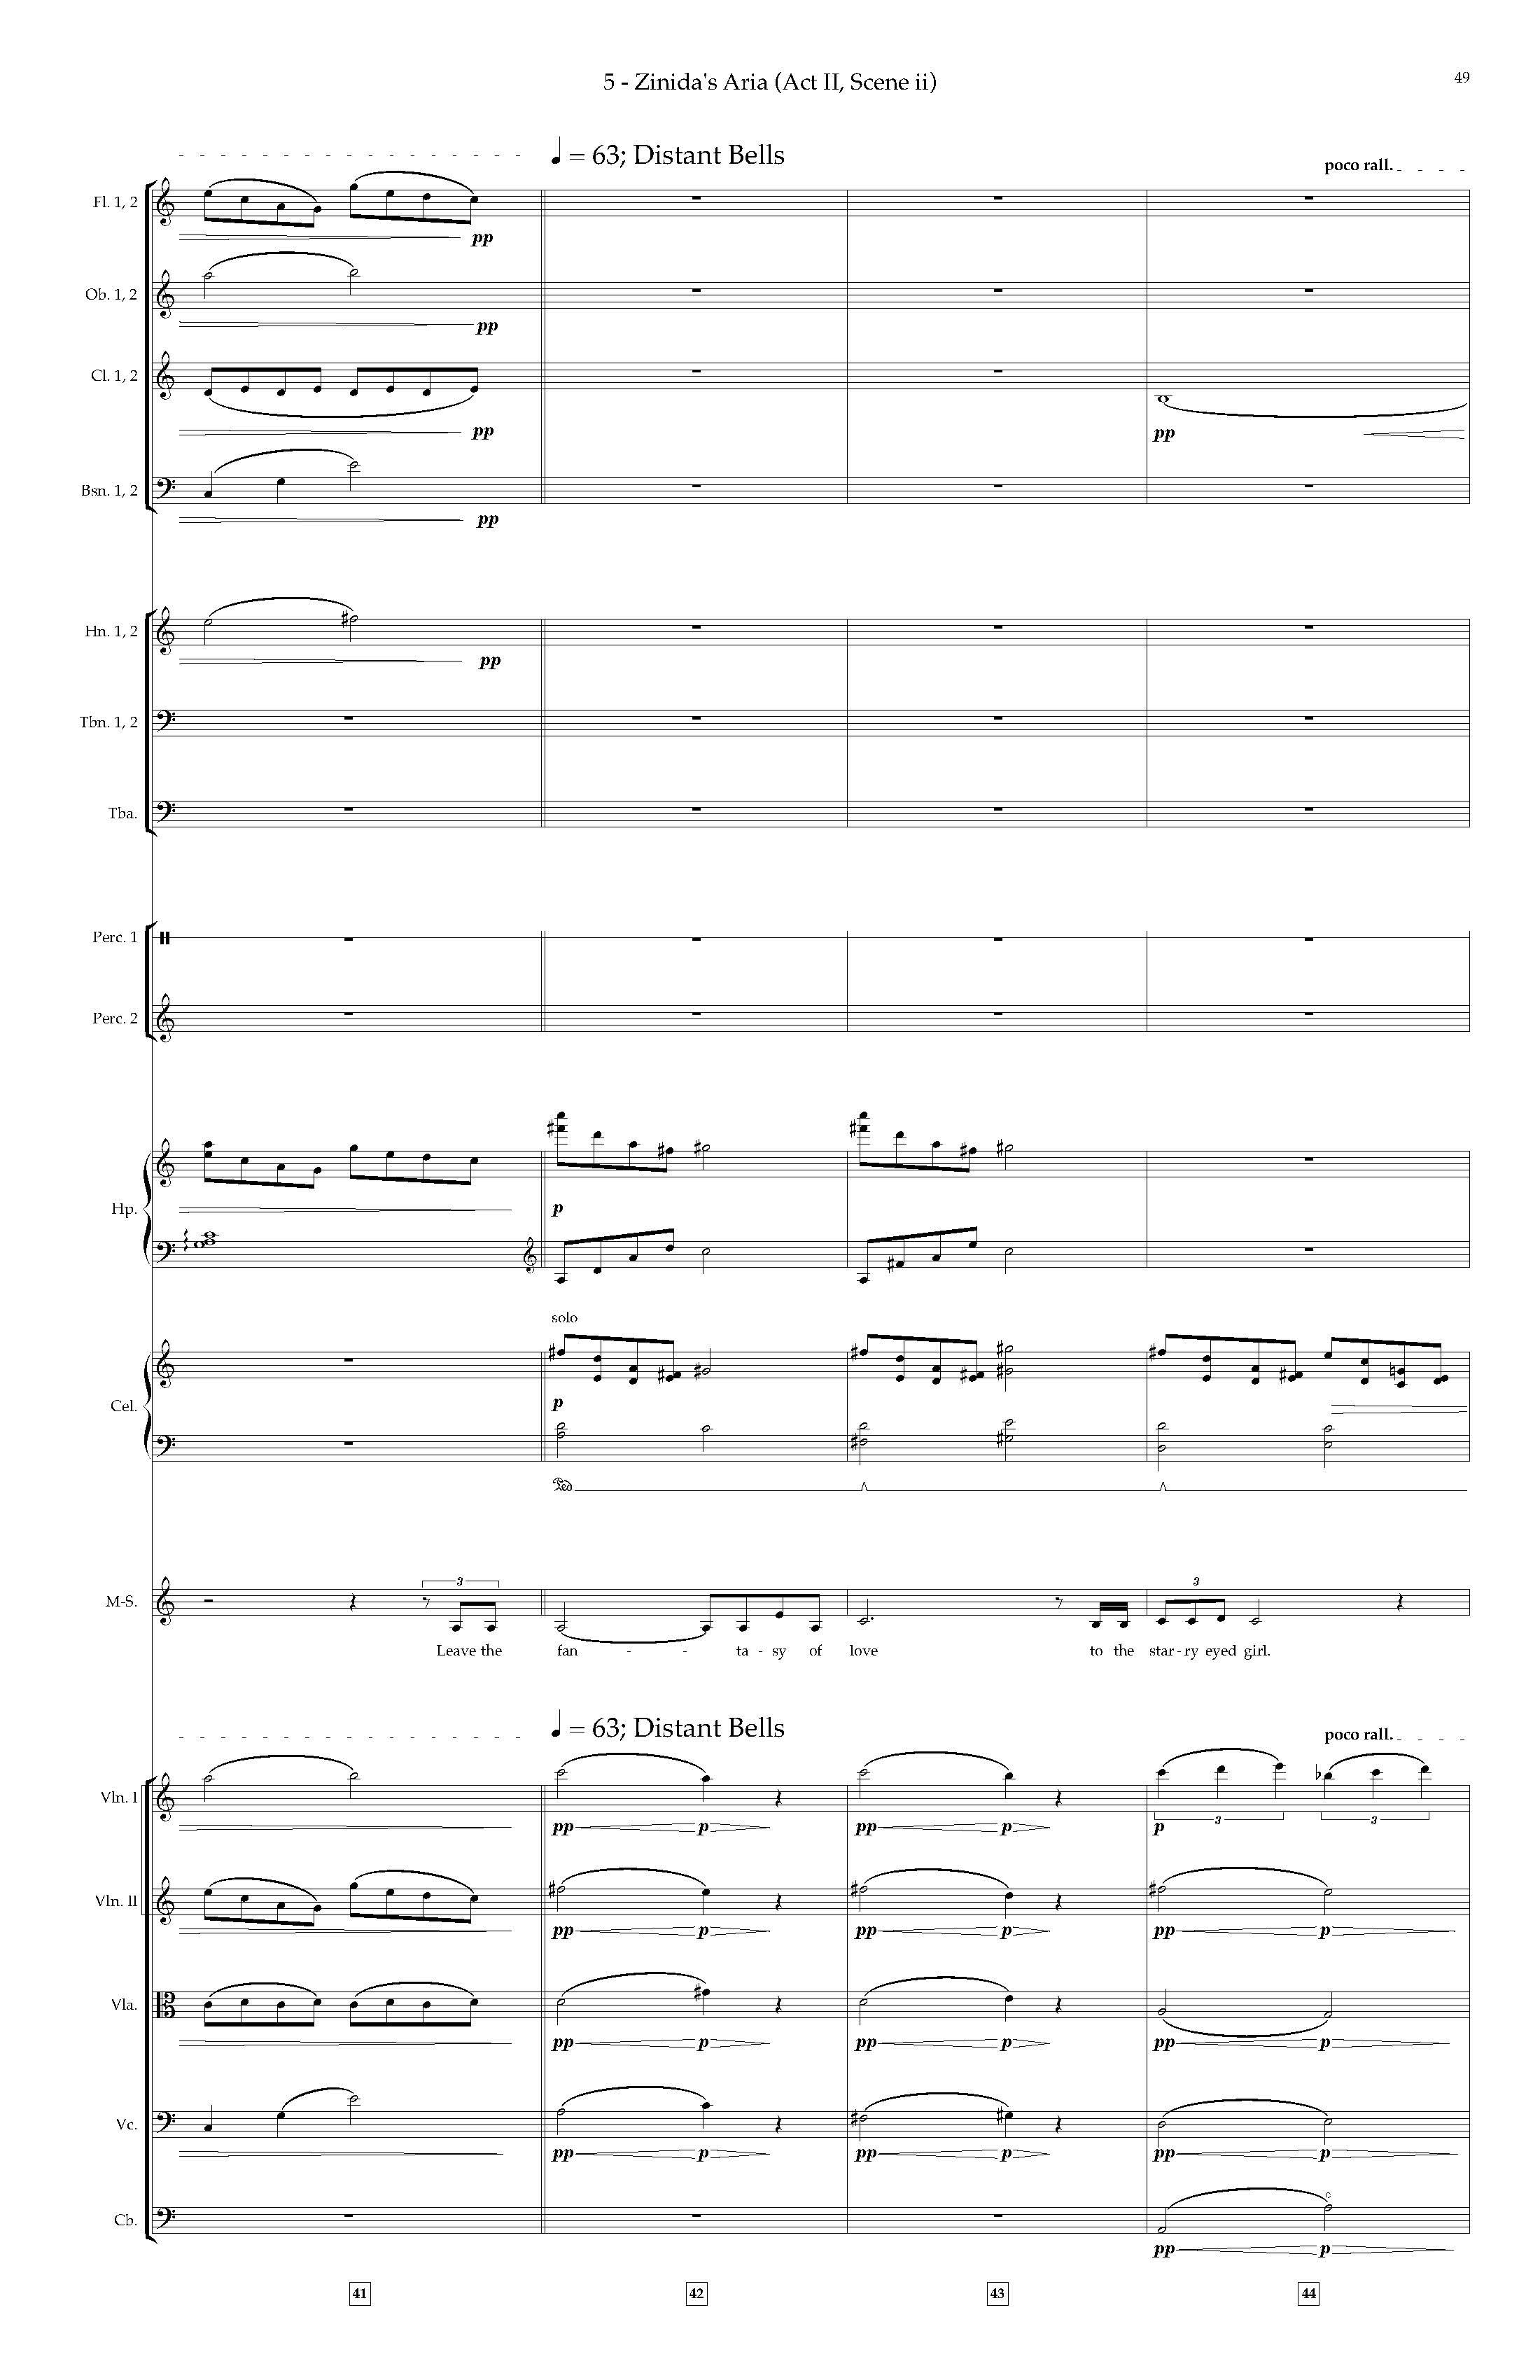 Arias and Interludes from HWGS - Complete Score_Page_55.jpg